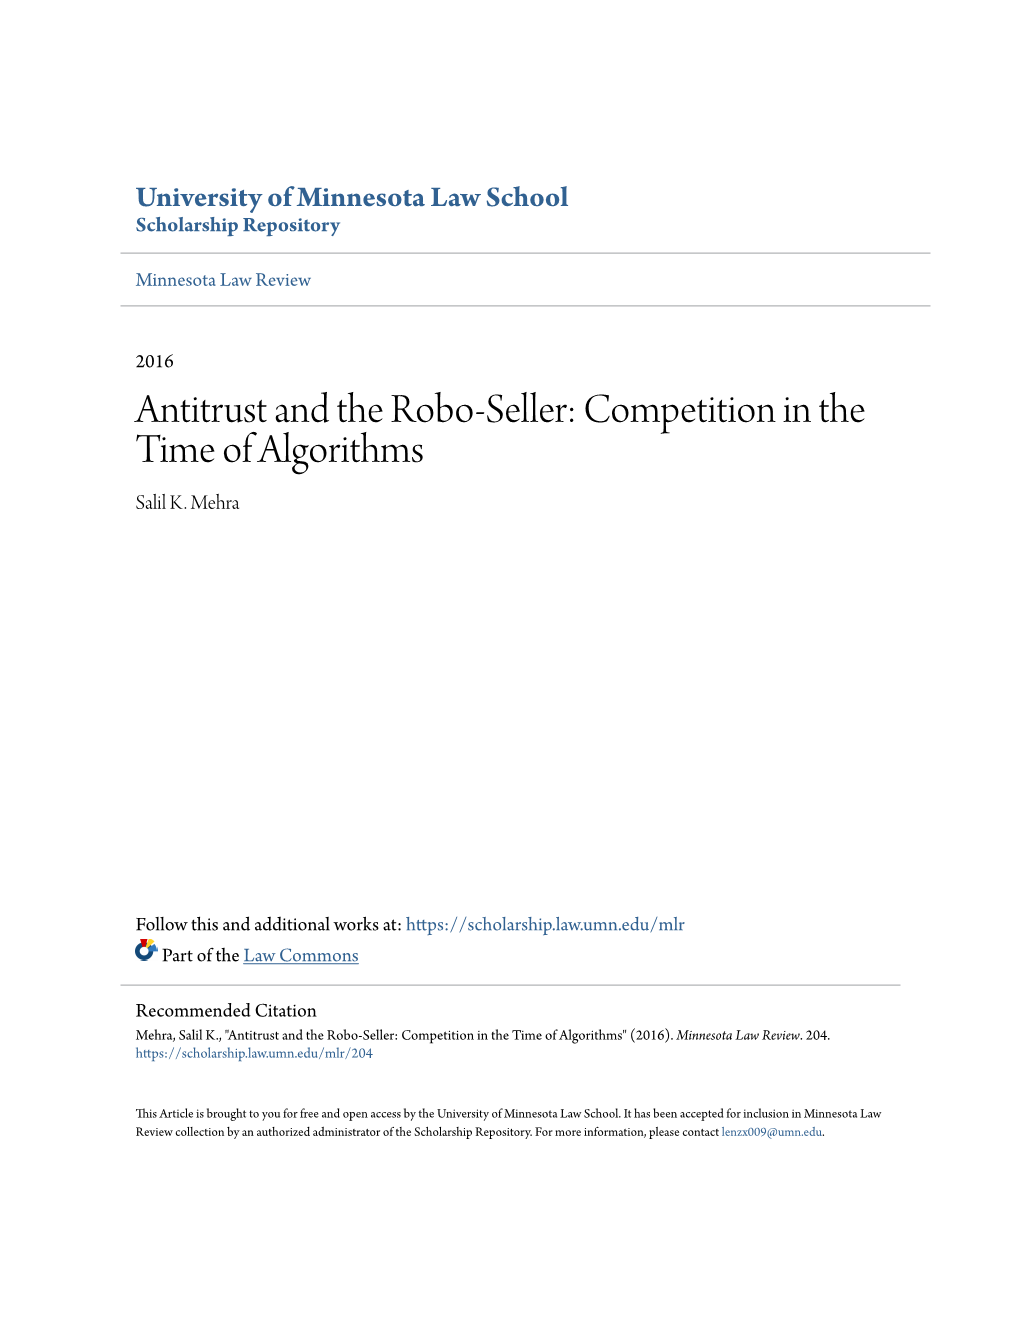 Antitrust and the Robo-Seller: Competition in the Time of Algorithms Salil K